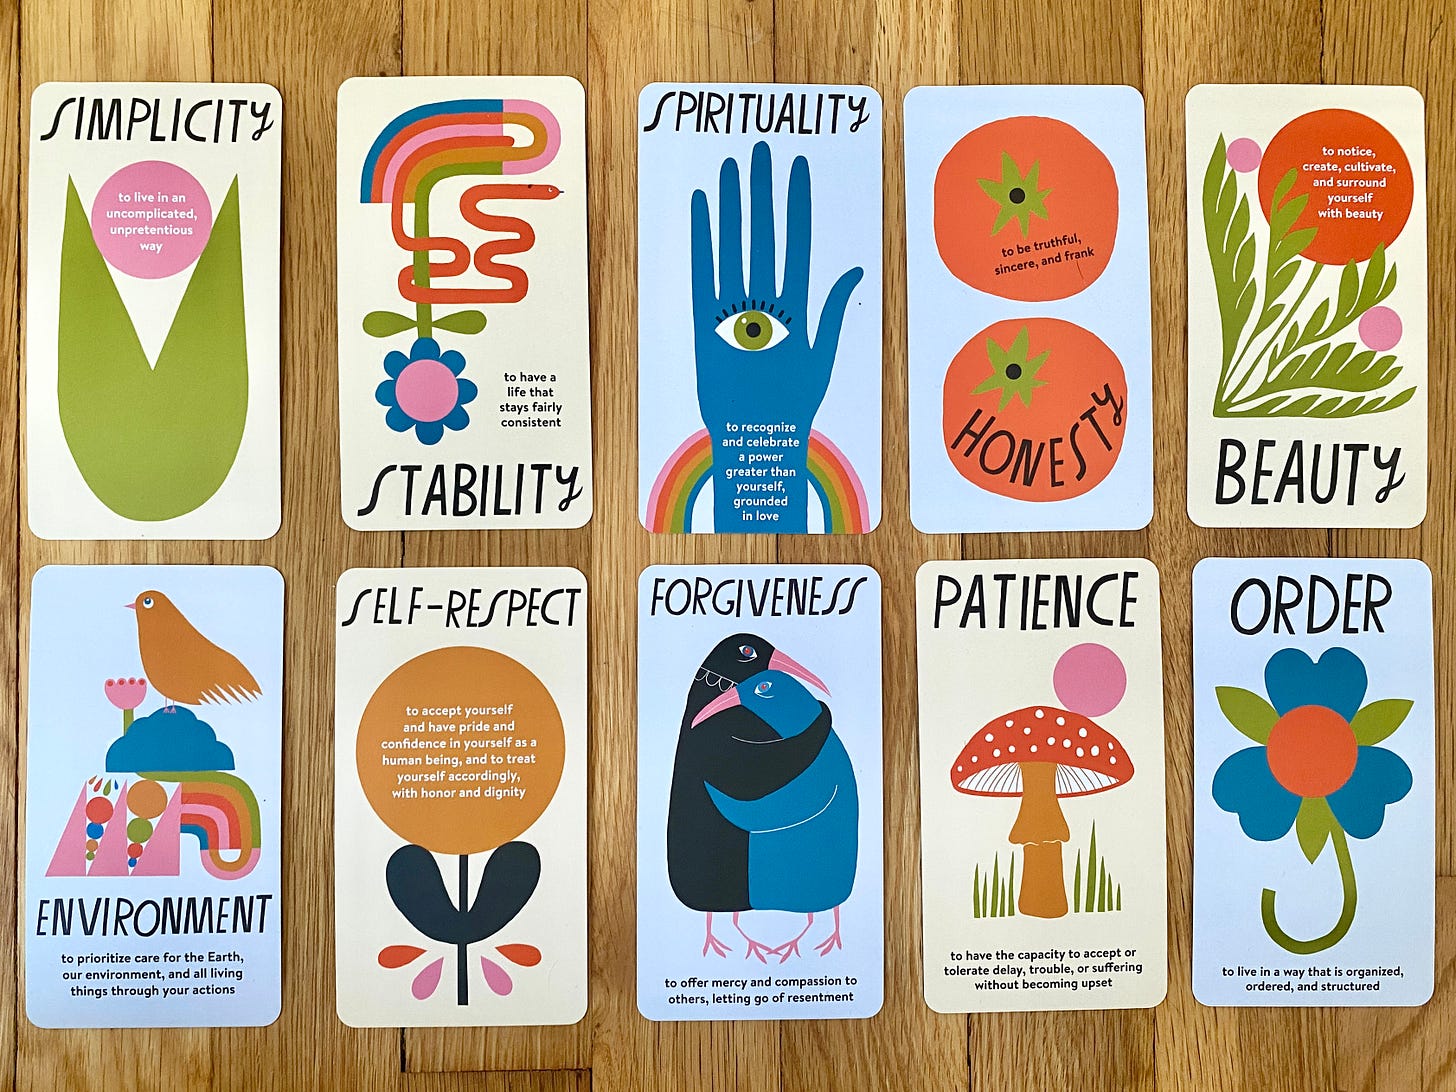 Ten colorful values cards sitting on a wood floor. Each card names a value, which includes simplicity, stability, spirituality, honesty, beauty, environment, self-respect, forgiveness, patience, order. Each card has the name of the value and a colorful illustration by Lisa Congdon that represents the value.